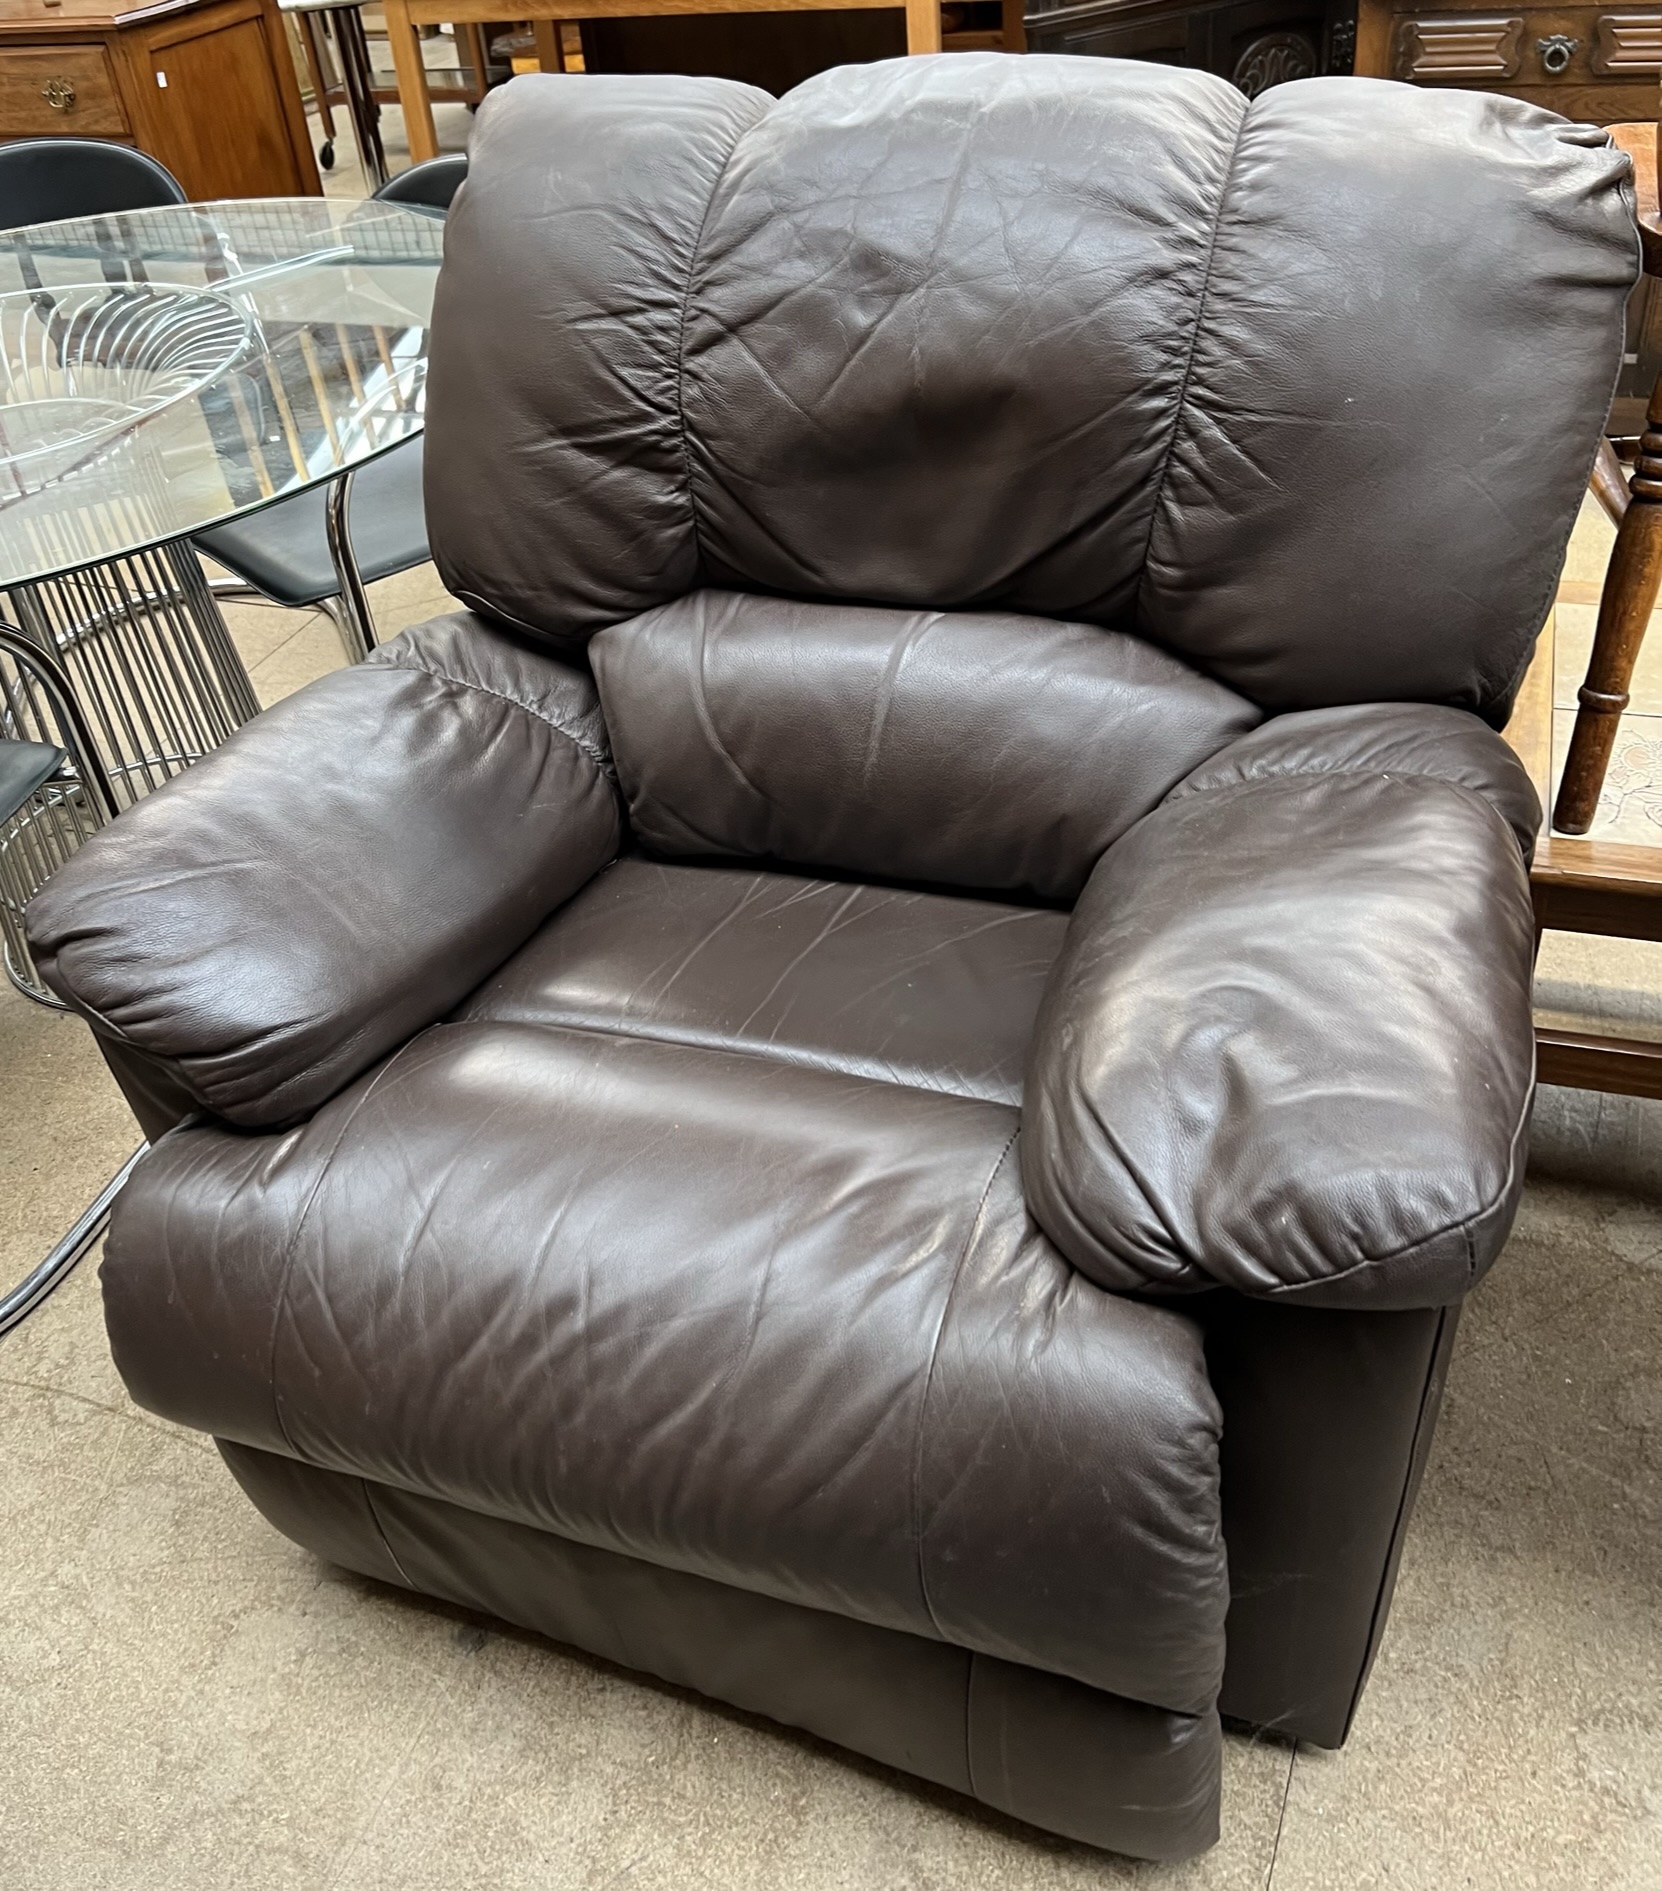 A brown leather reclining chair